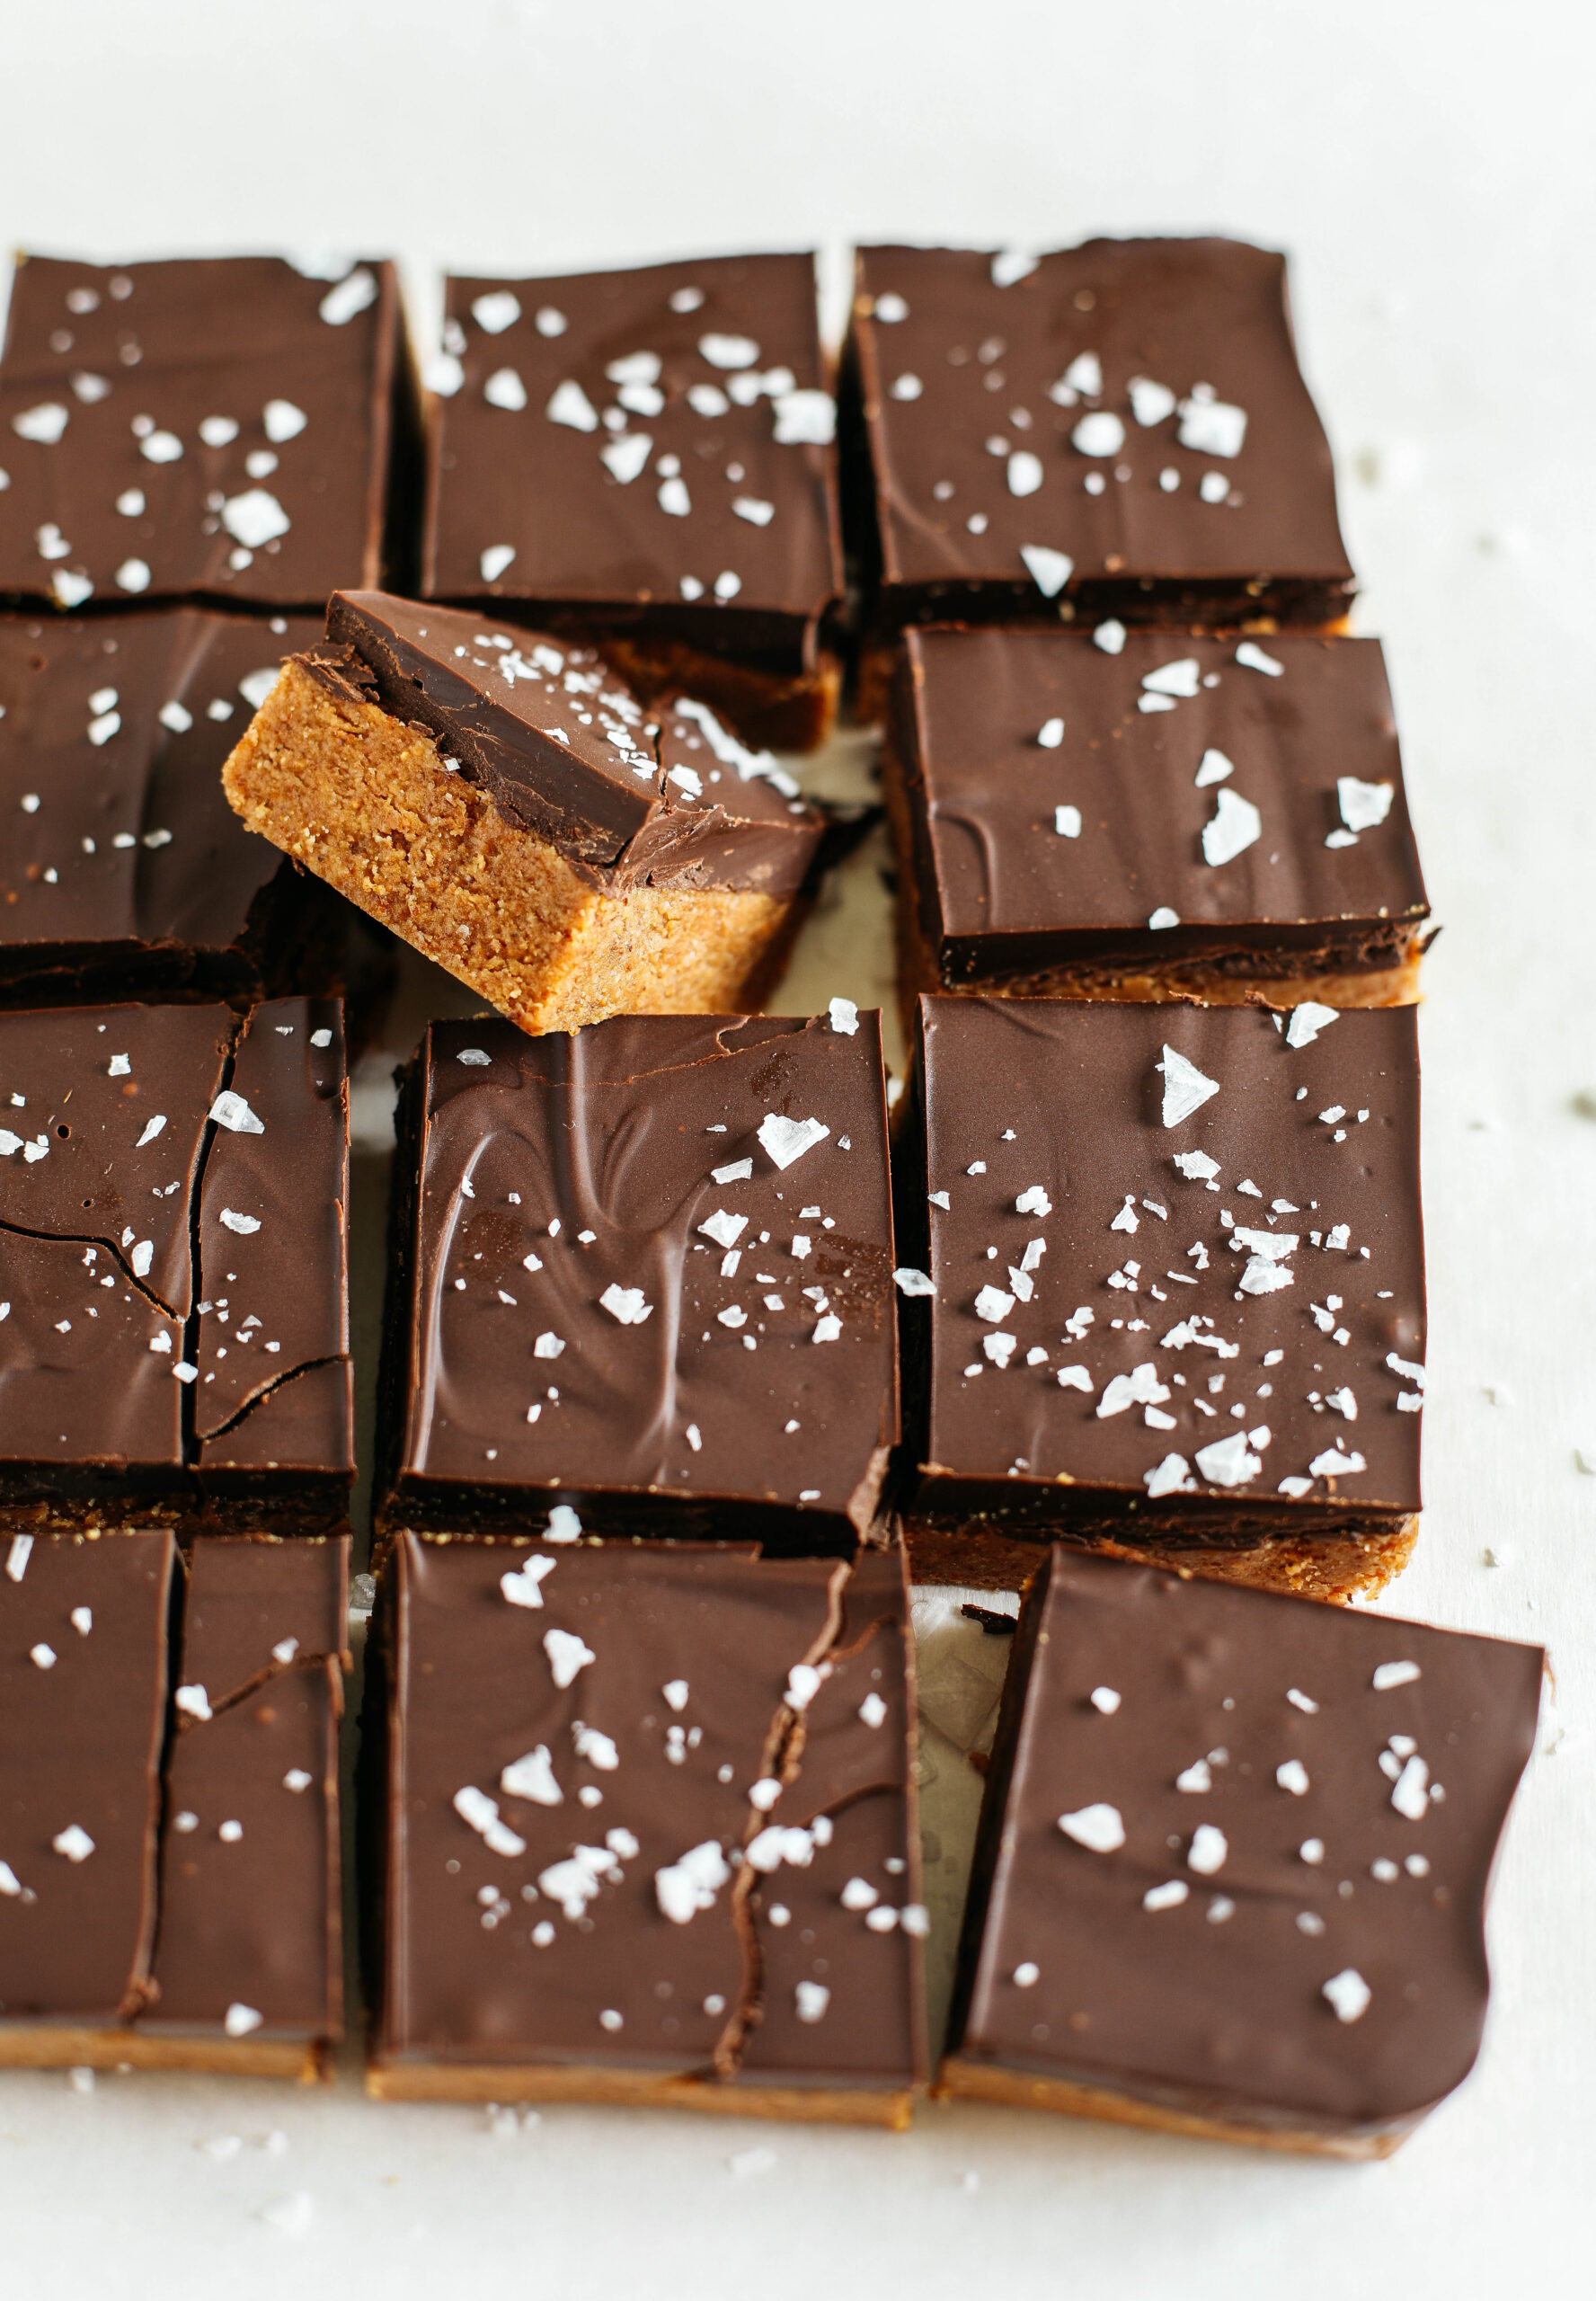 These Dark Chocolate Almond Butter Bars are rich, fudgy and make the perfect sweet treat with just a few simple ingredients and zero baking required!